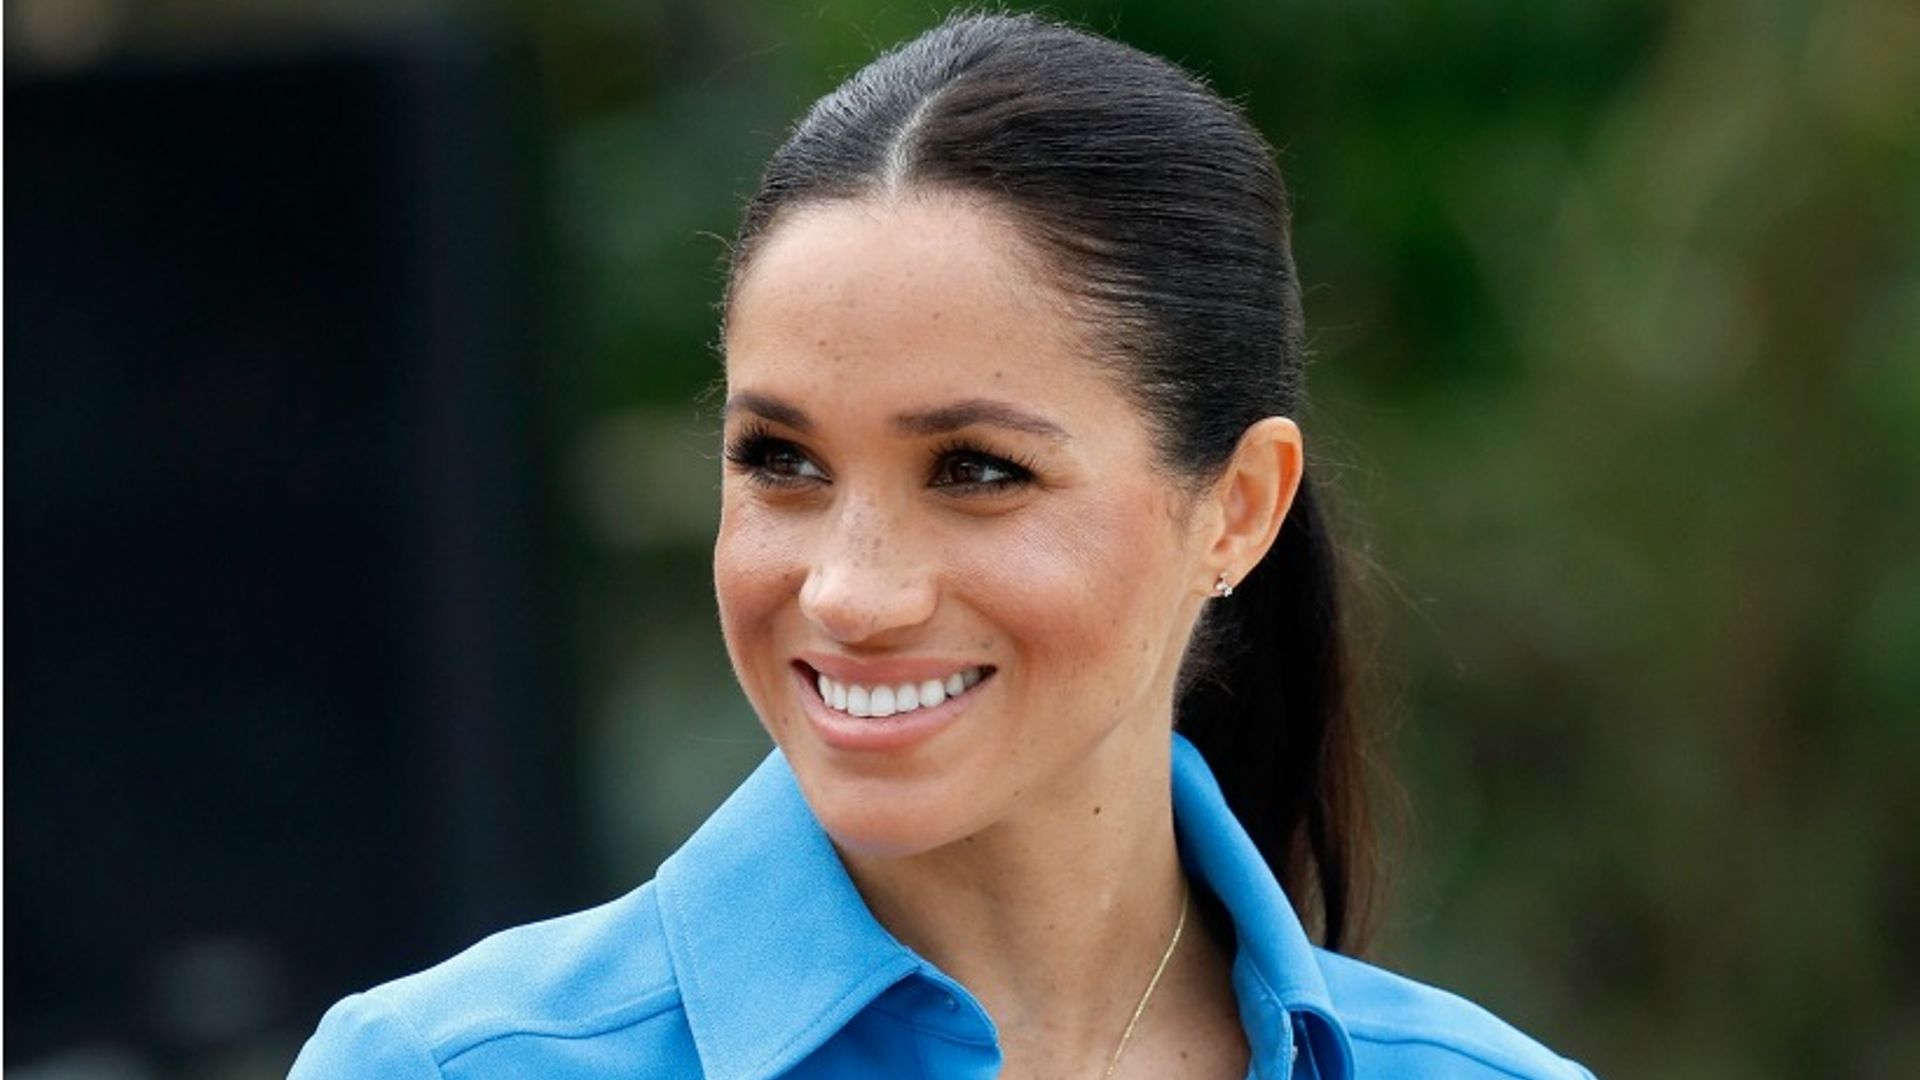 Meghan Markle's best hair moments on the royal tour